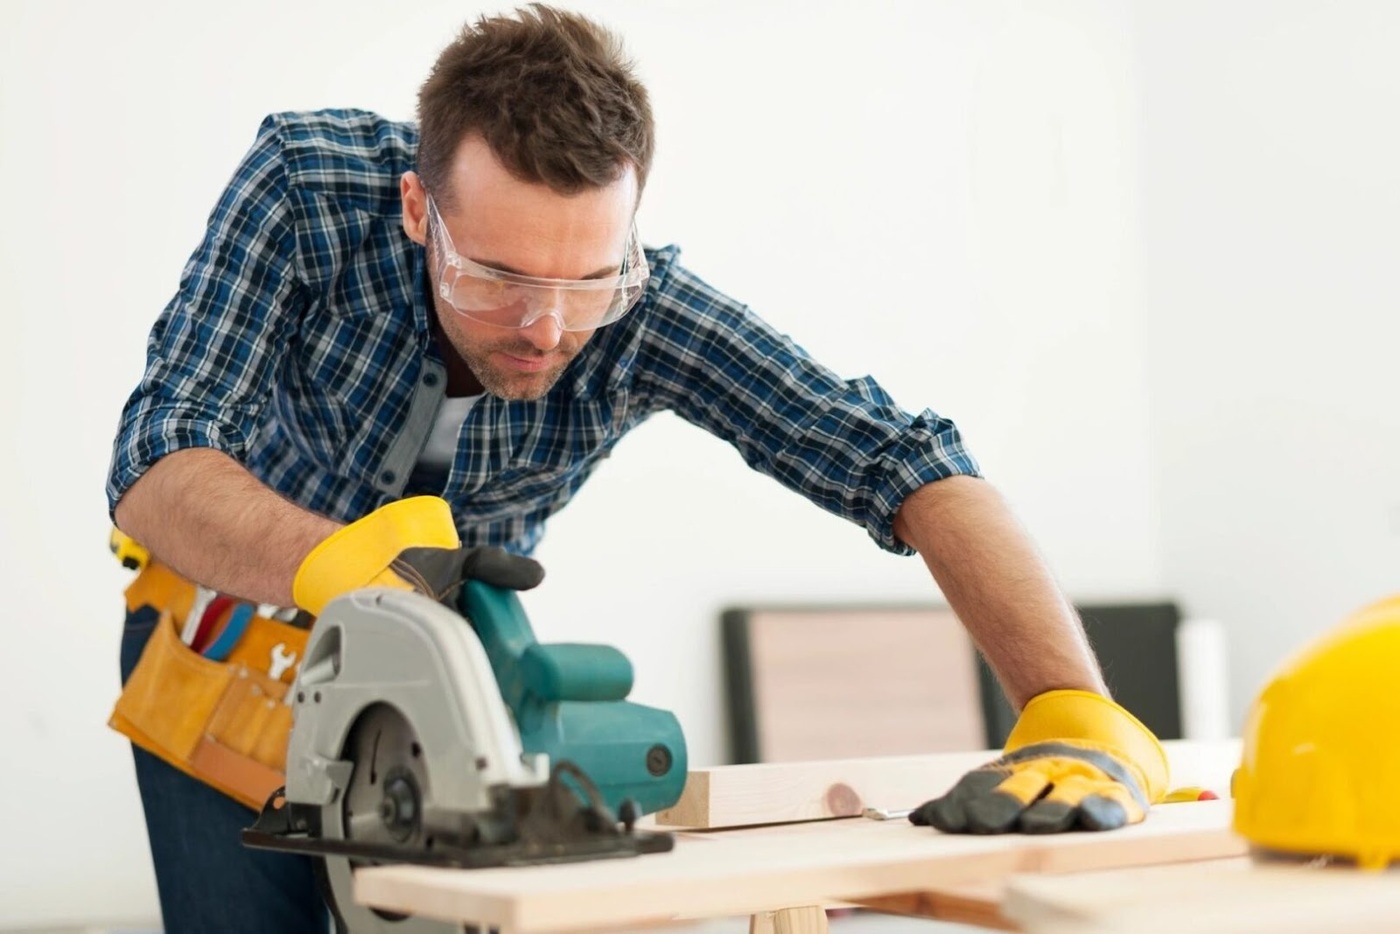 1 Stop Handyman has years of experience in home improvement projects.